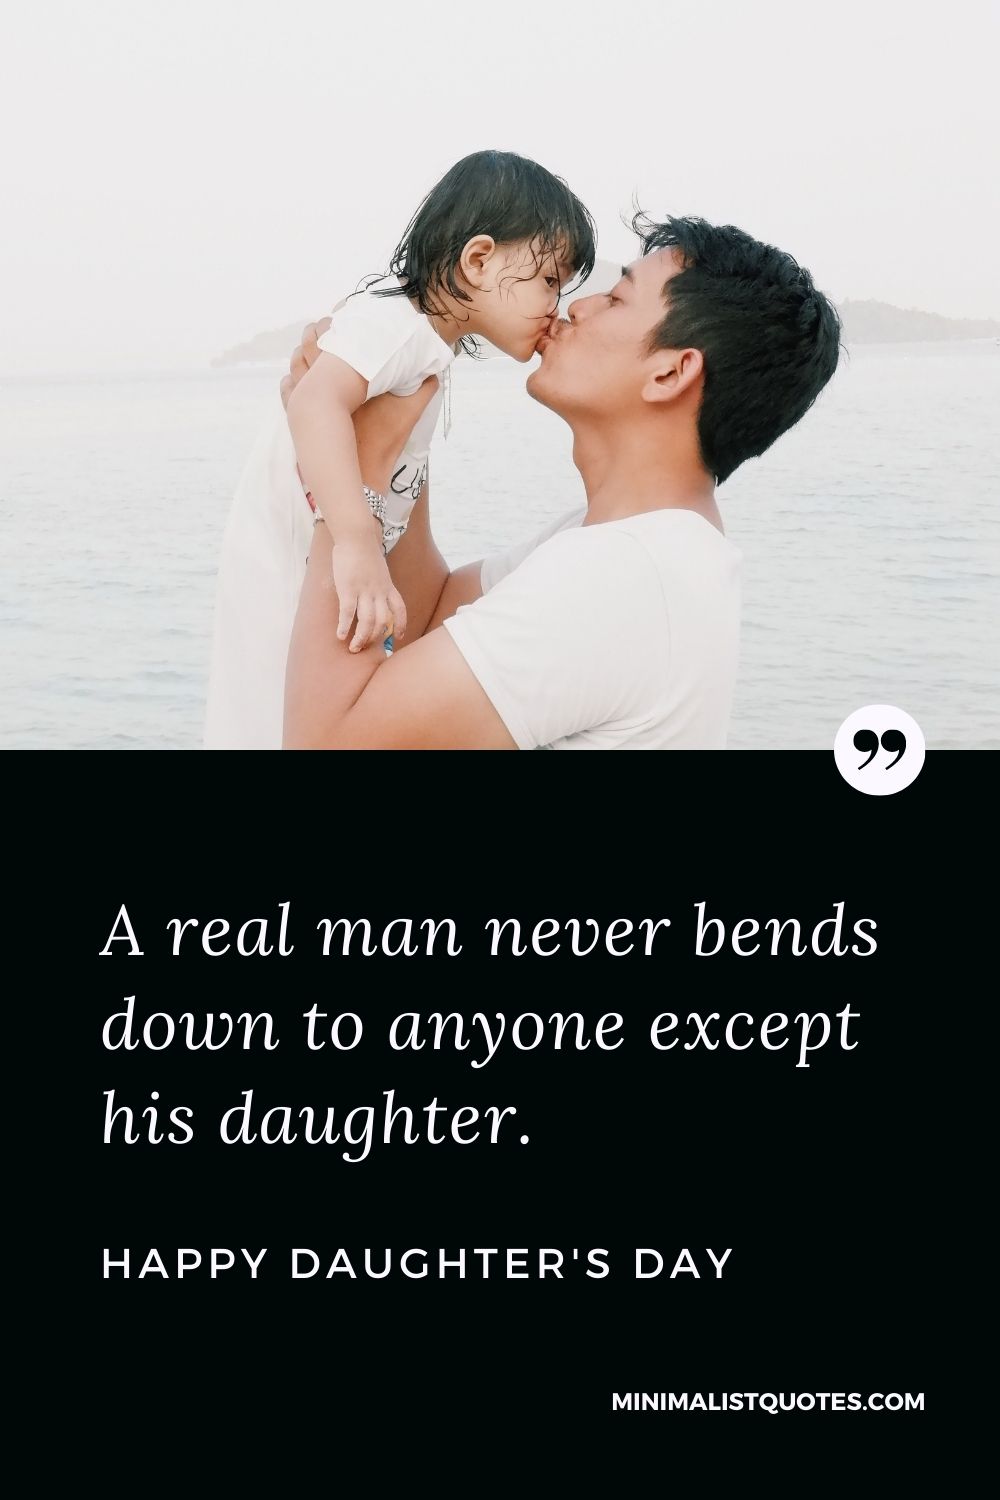 Daughter's Day Wish, Quote & Message With Image: A real man never bends down to anyone except his daughter. Happy Daughter's Day!